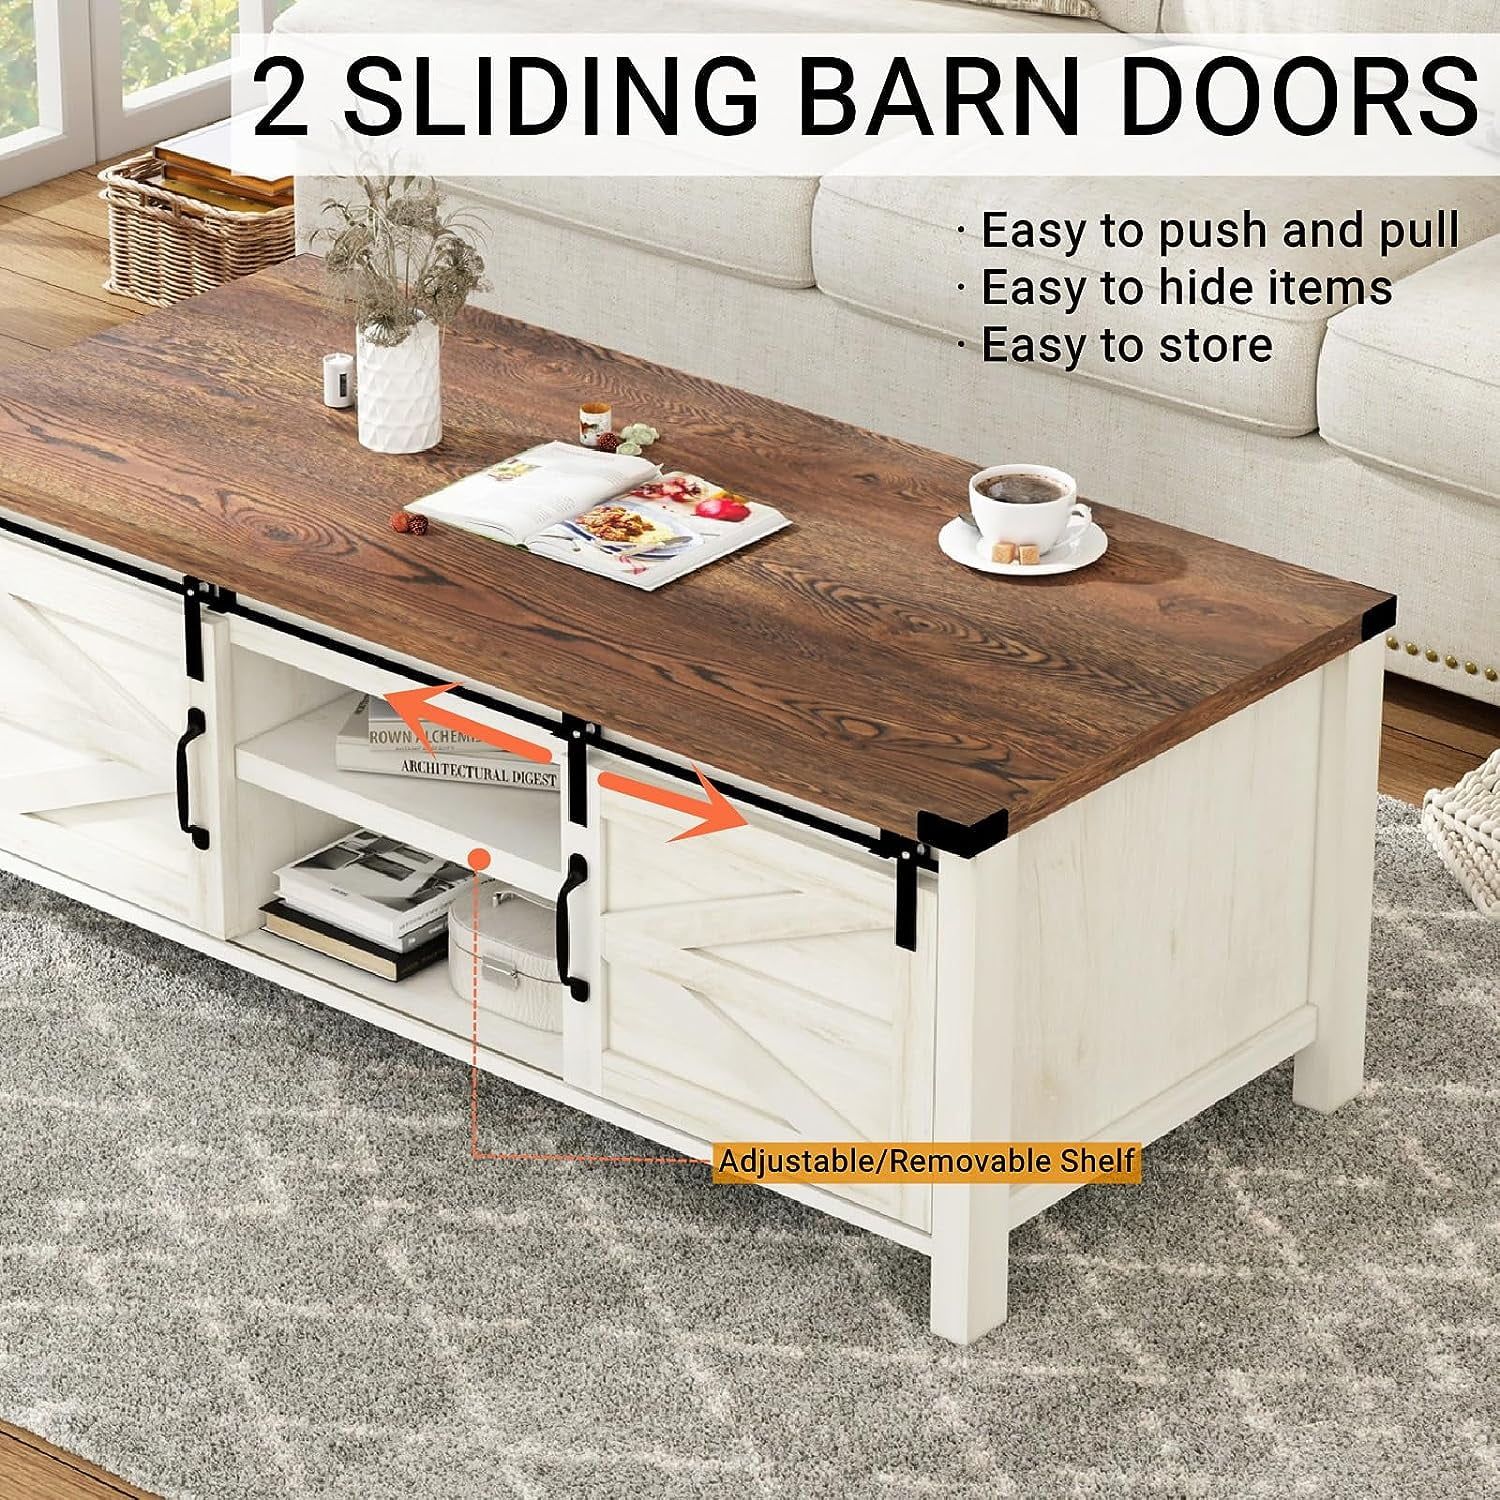 48" Modern Farmhouse Coffee Table With Adjustable Storage Cabinets Shelves,  Modern Coffee Table For Living Room With Sliding Barn Door(retro White) –  Walmart Intended For Coffee Tables With Sliding Barn Doors (View 11 of 15)